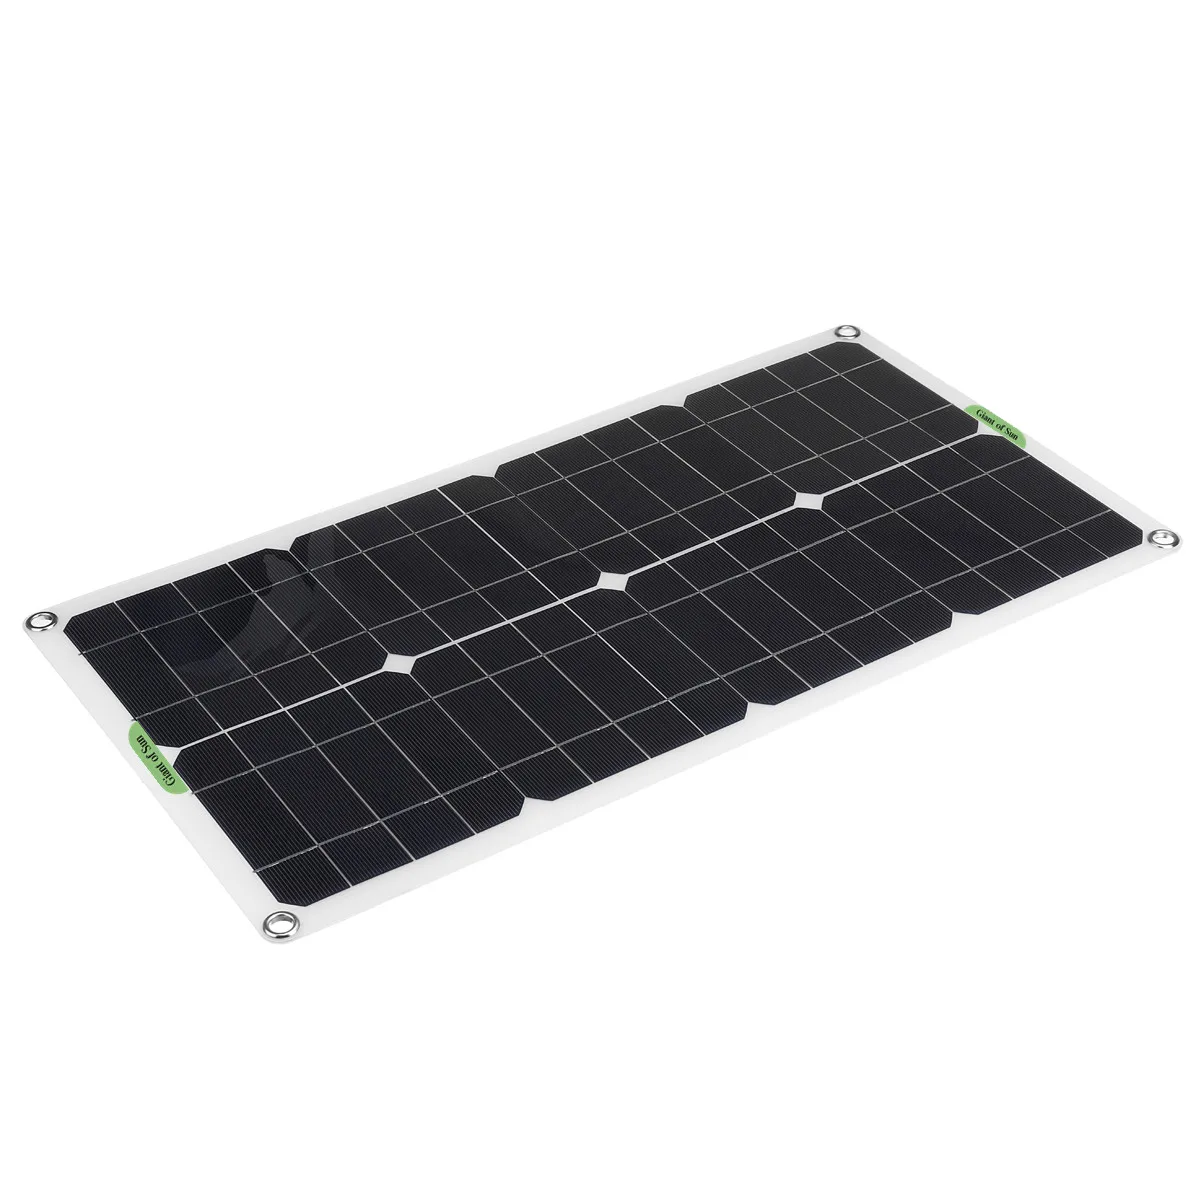 100W Solar Panel Kits 12V/24V with 30A/60A/100A Controller Dual USB for Car Yacht RV Boat Mobile Phone Battery Charger Supplies